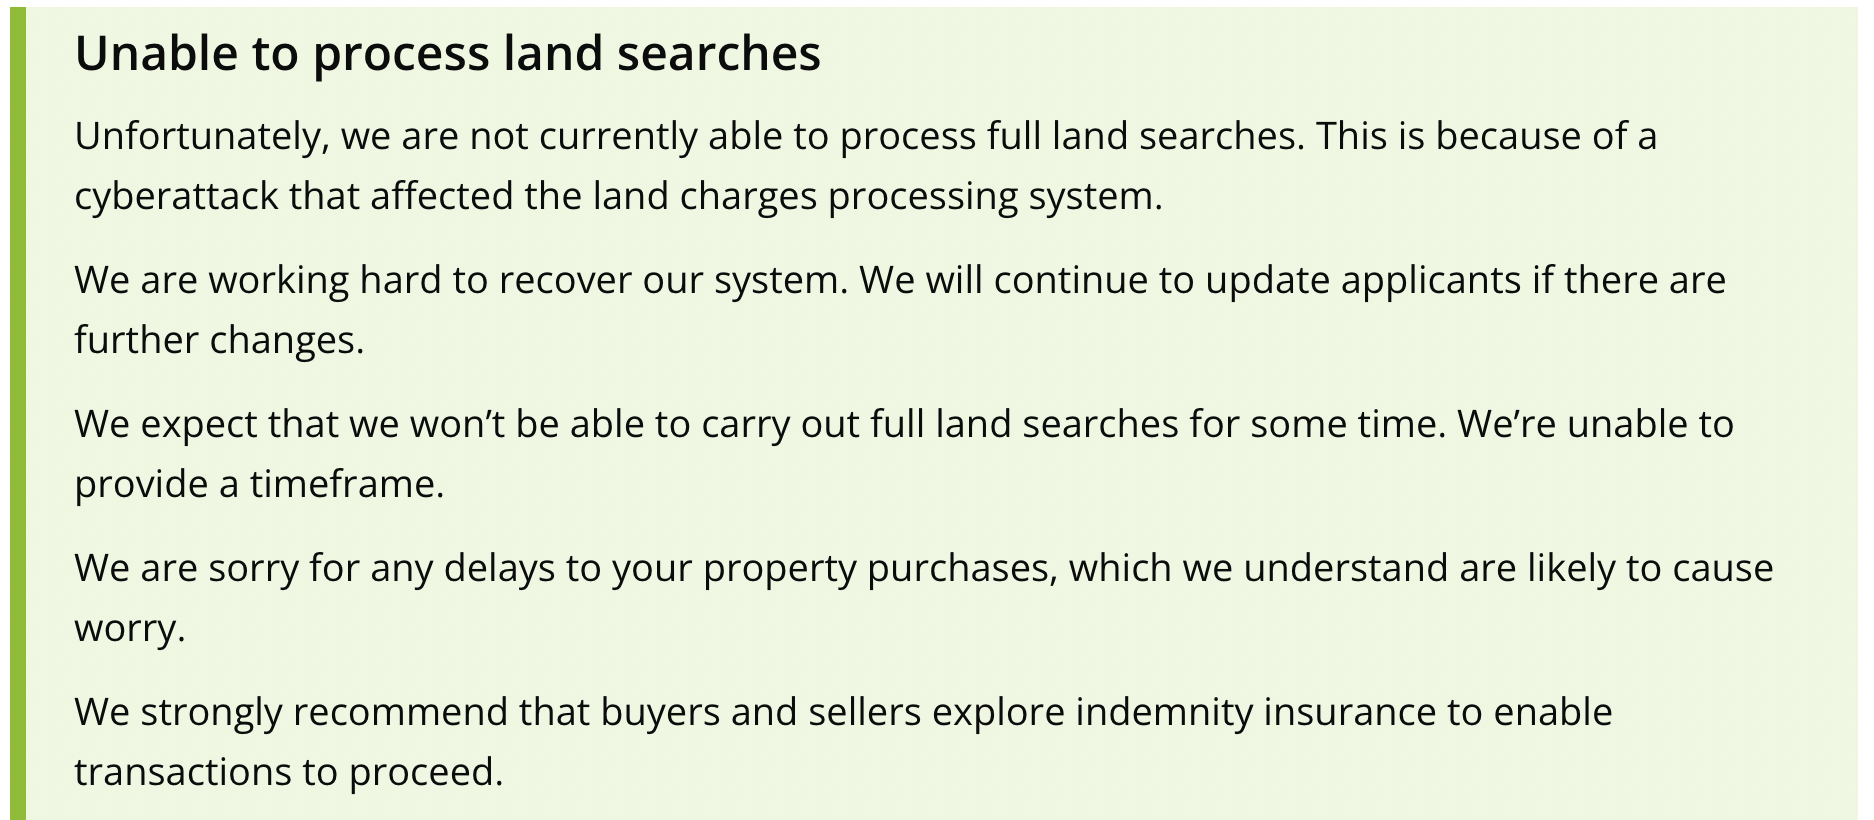 Source: https://hackney.gov.uk/local-land-charges-search